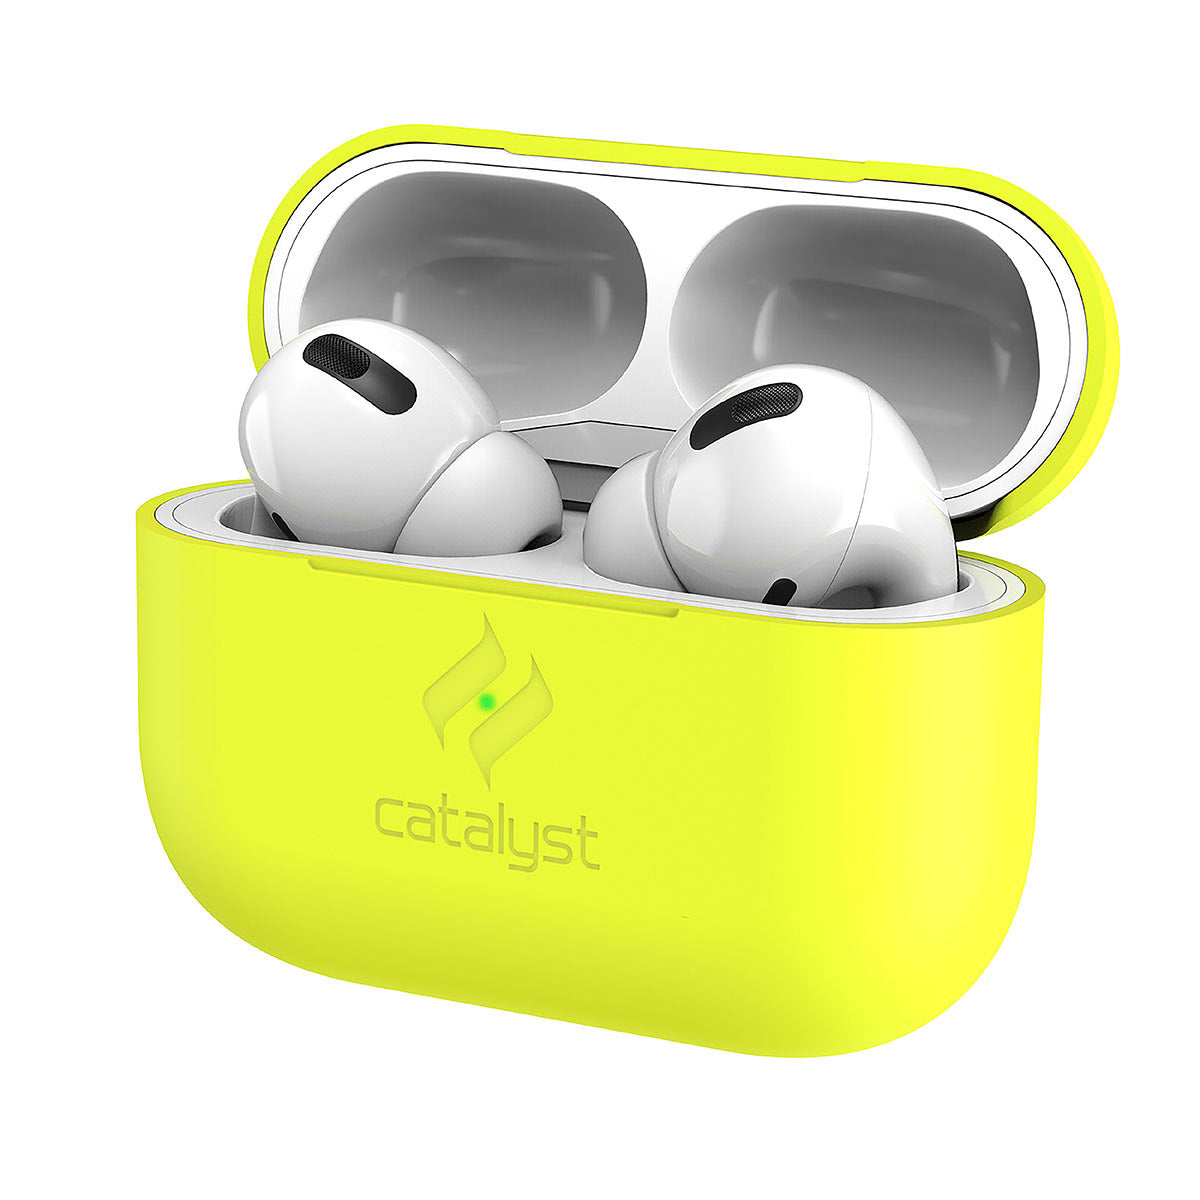 Catalyst airpods pro gen 2/1 slim case showing a closer look of front view of the case in neon yellow colorway